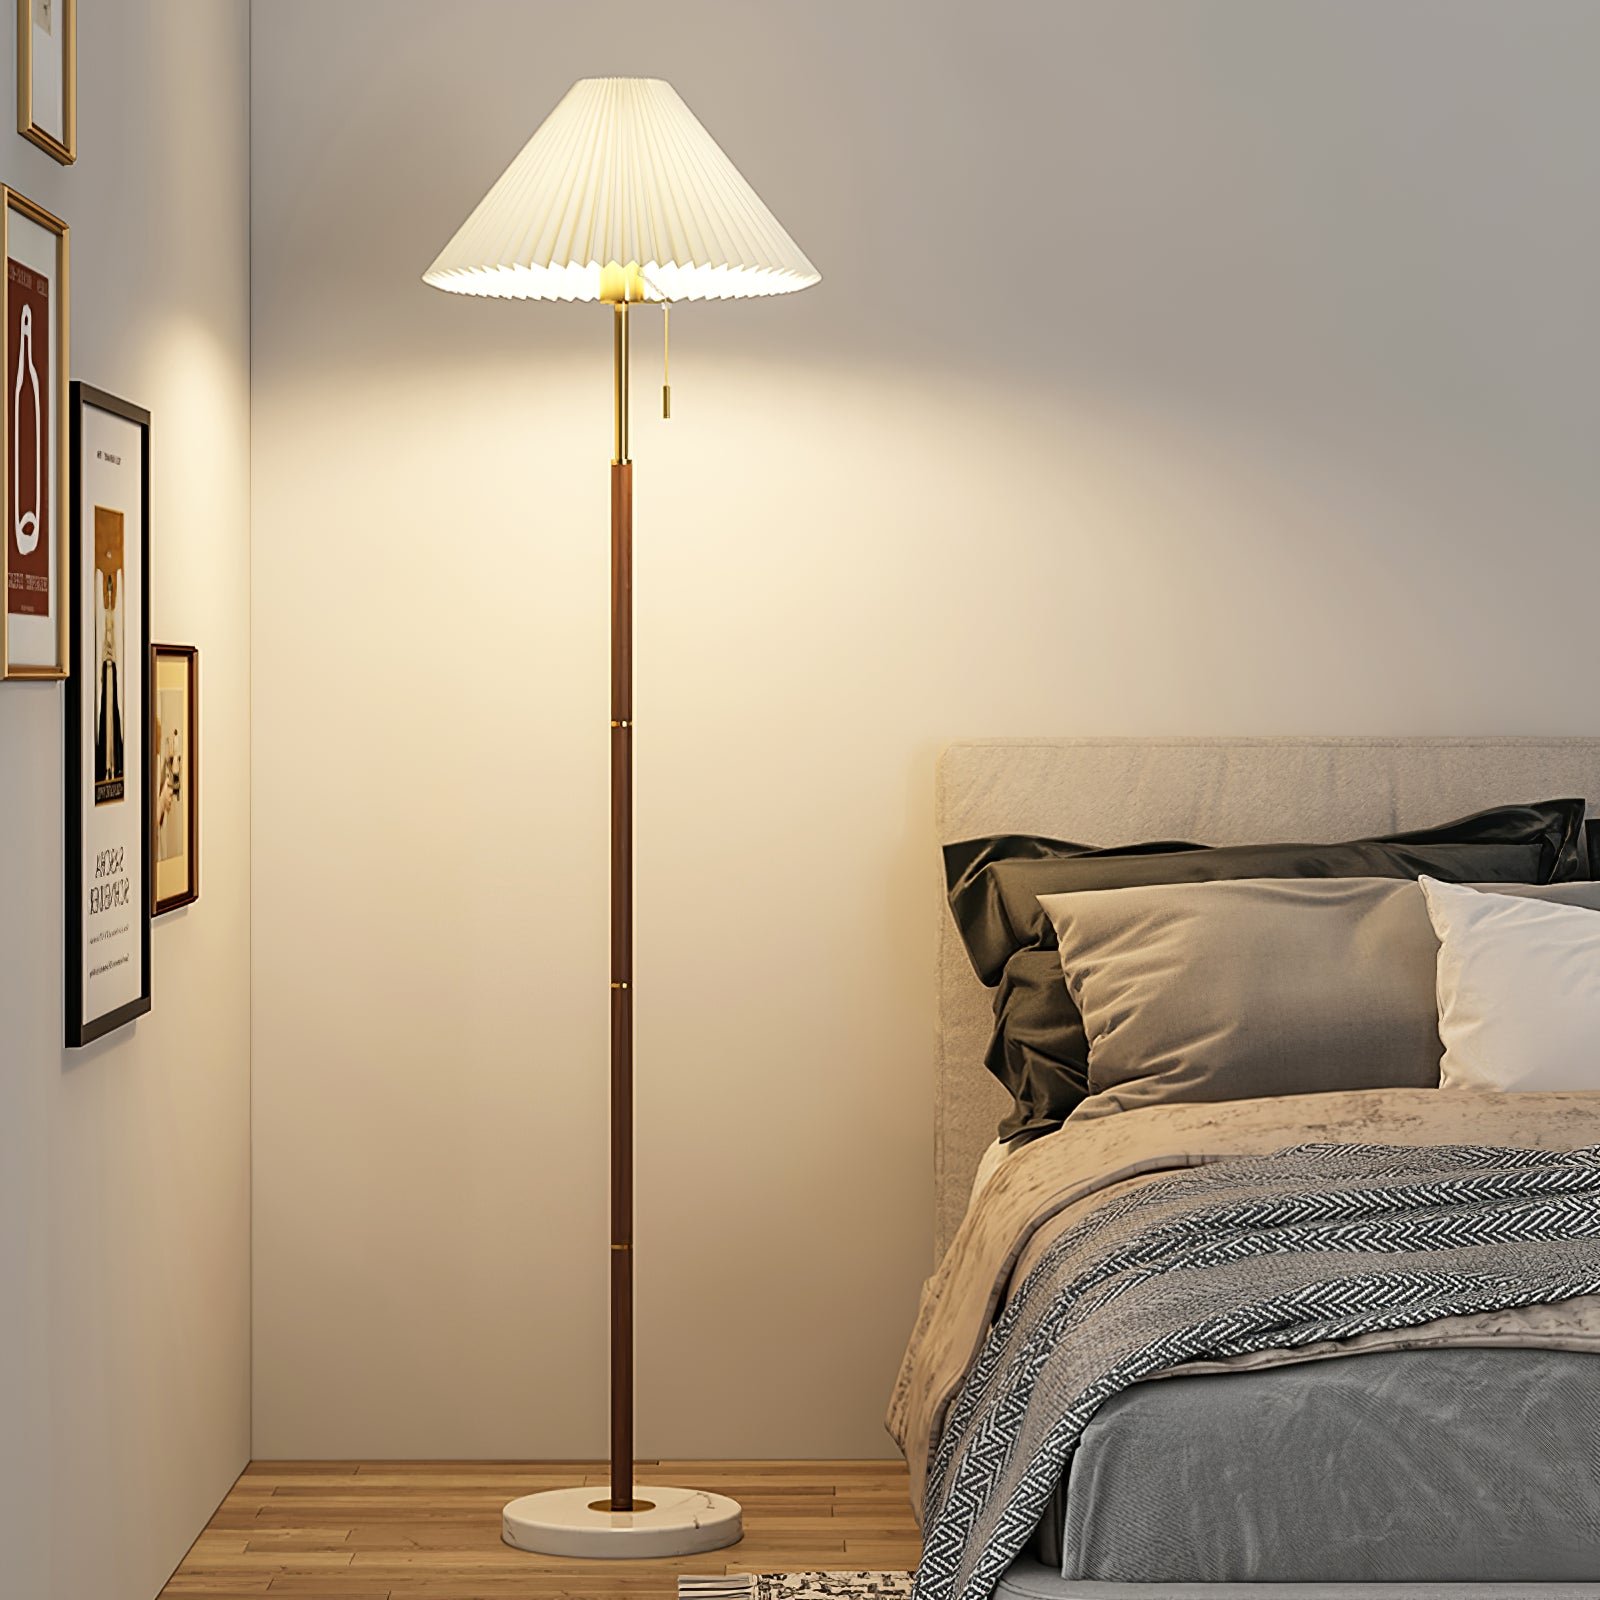 Vintage Pleated Floor Lamp with a diameter of 11 inches and a height of 66 inches, or 28cm in diameter and 168cm in height. The lamp is available in a Walnut or White finish and comes with an EU plug.